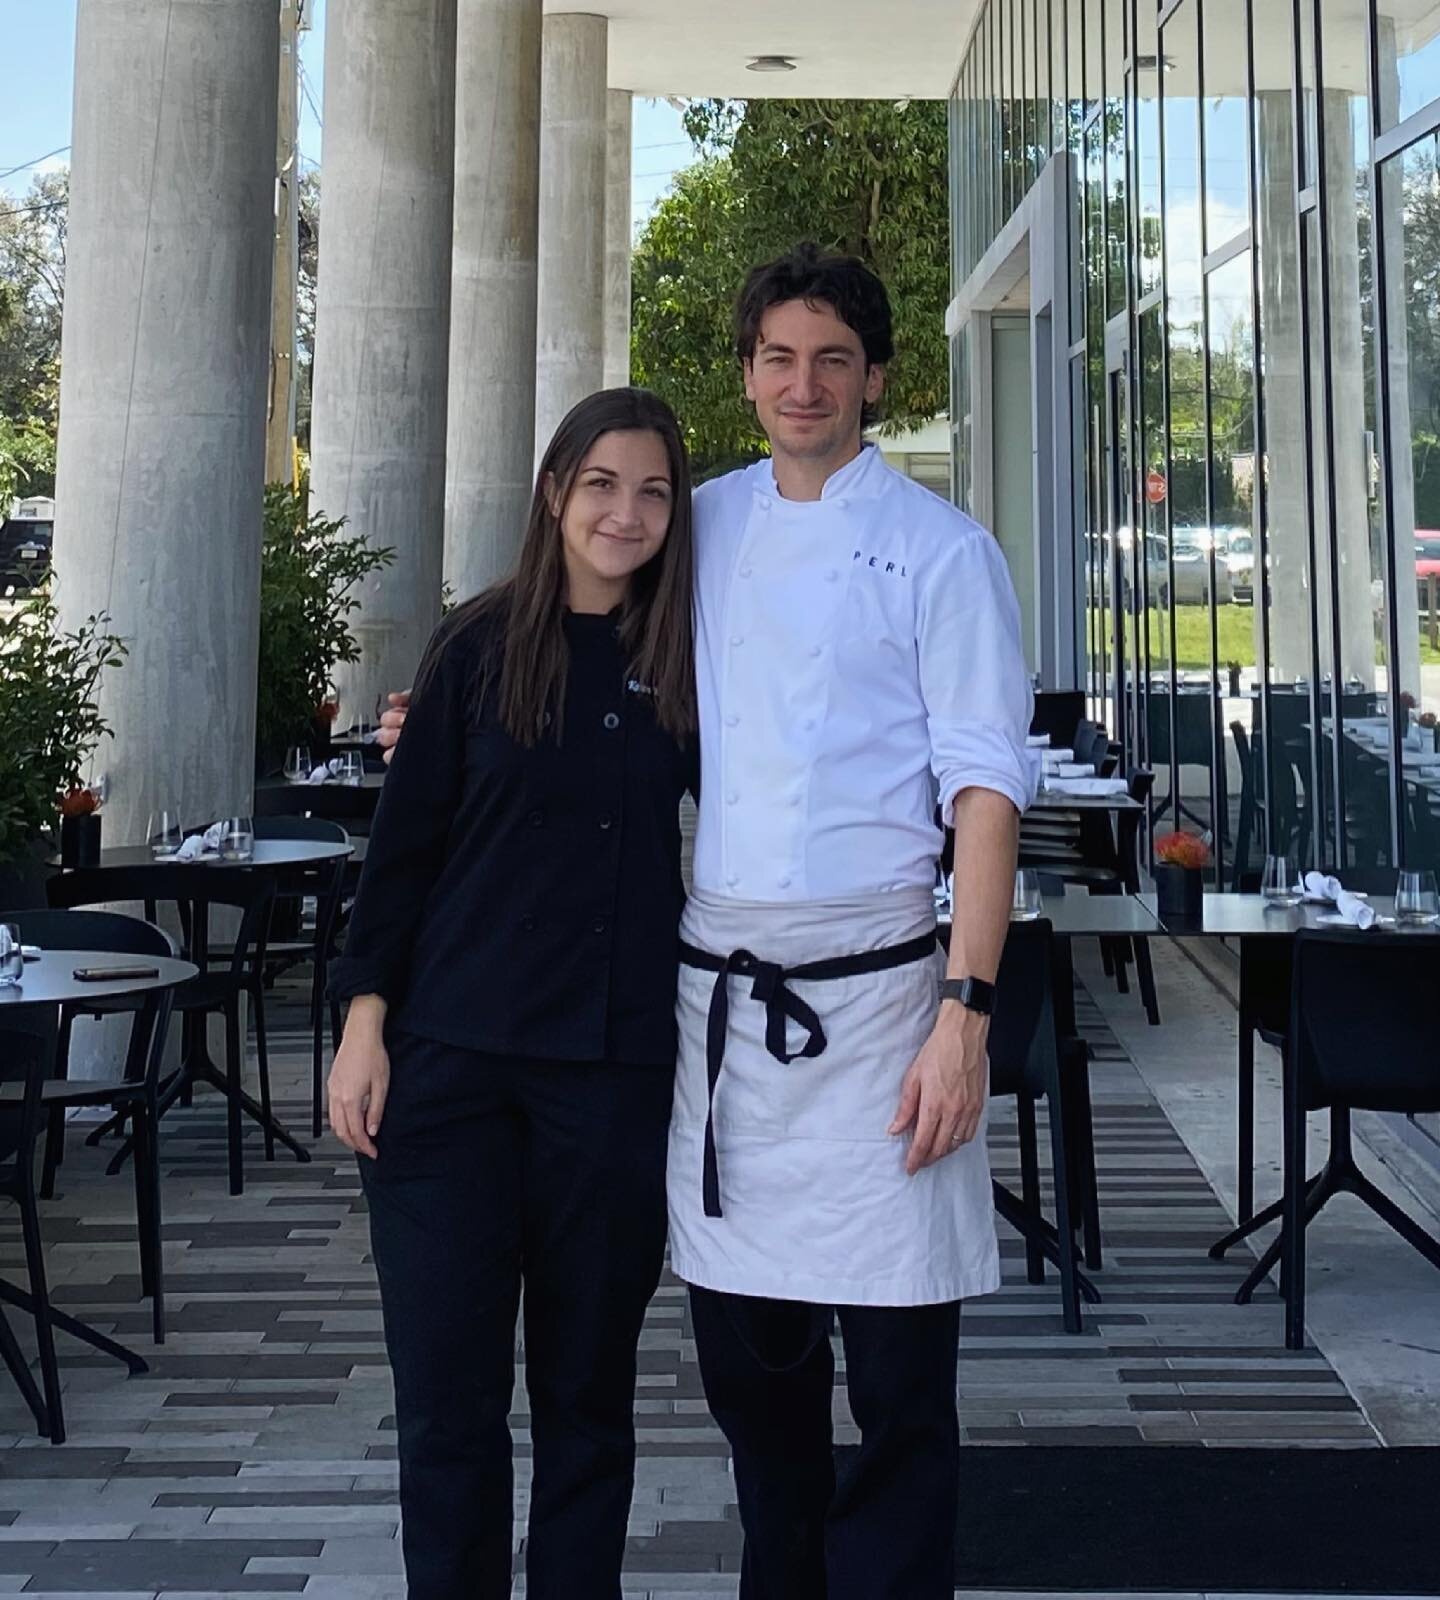 One year ago today, I started working for my chef &amp; mentor Isaac Perlman. So grateful to be a part of this kitchen family ❤️From level three, to @perl_restaurant we are the #dreamteam